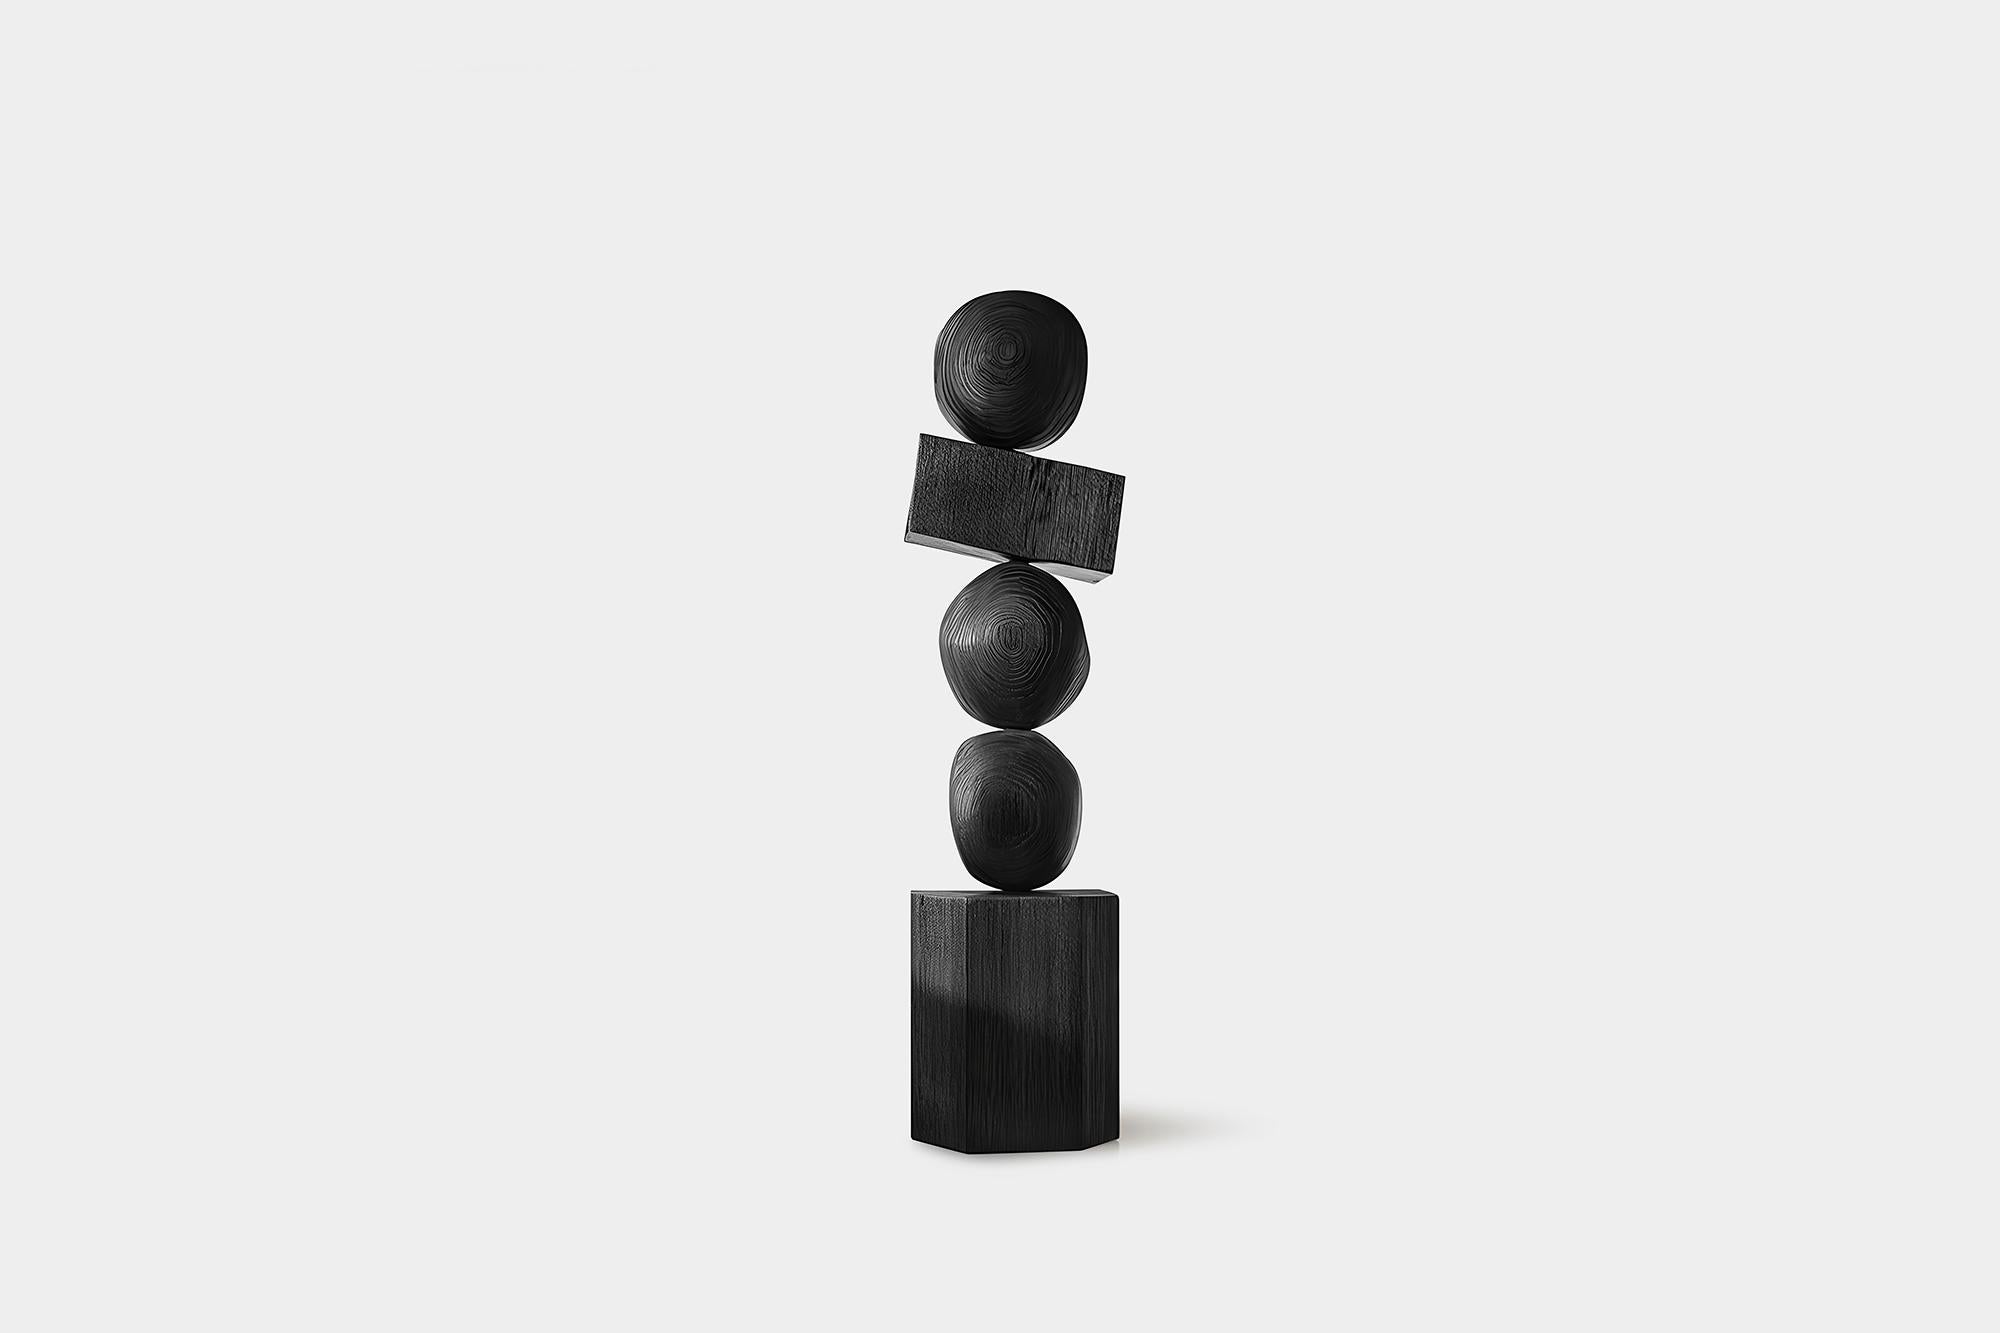 Hand-Crafted Joel Escalona's Sleek Dark Totem in Black Solid Wood, Still Stand No92 For Sale